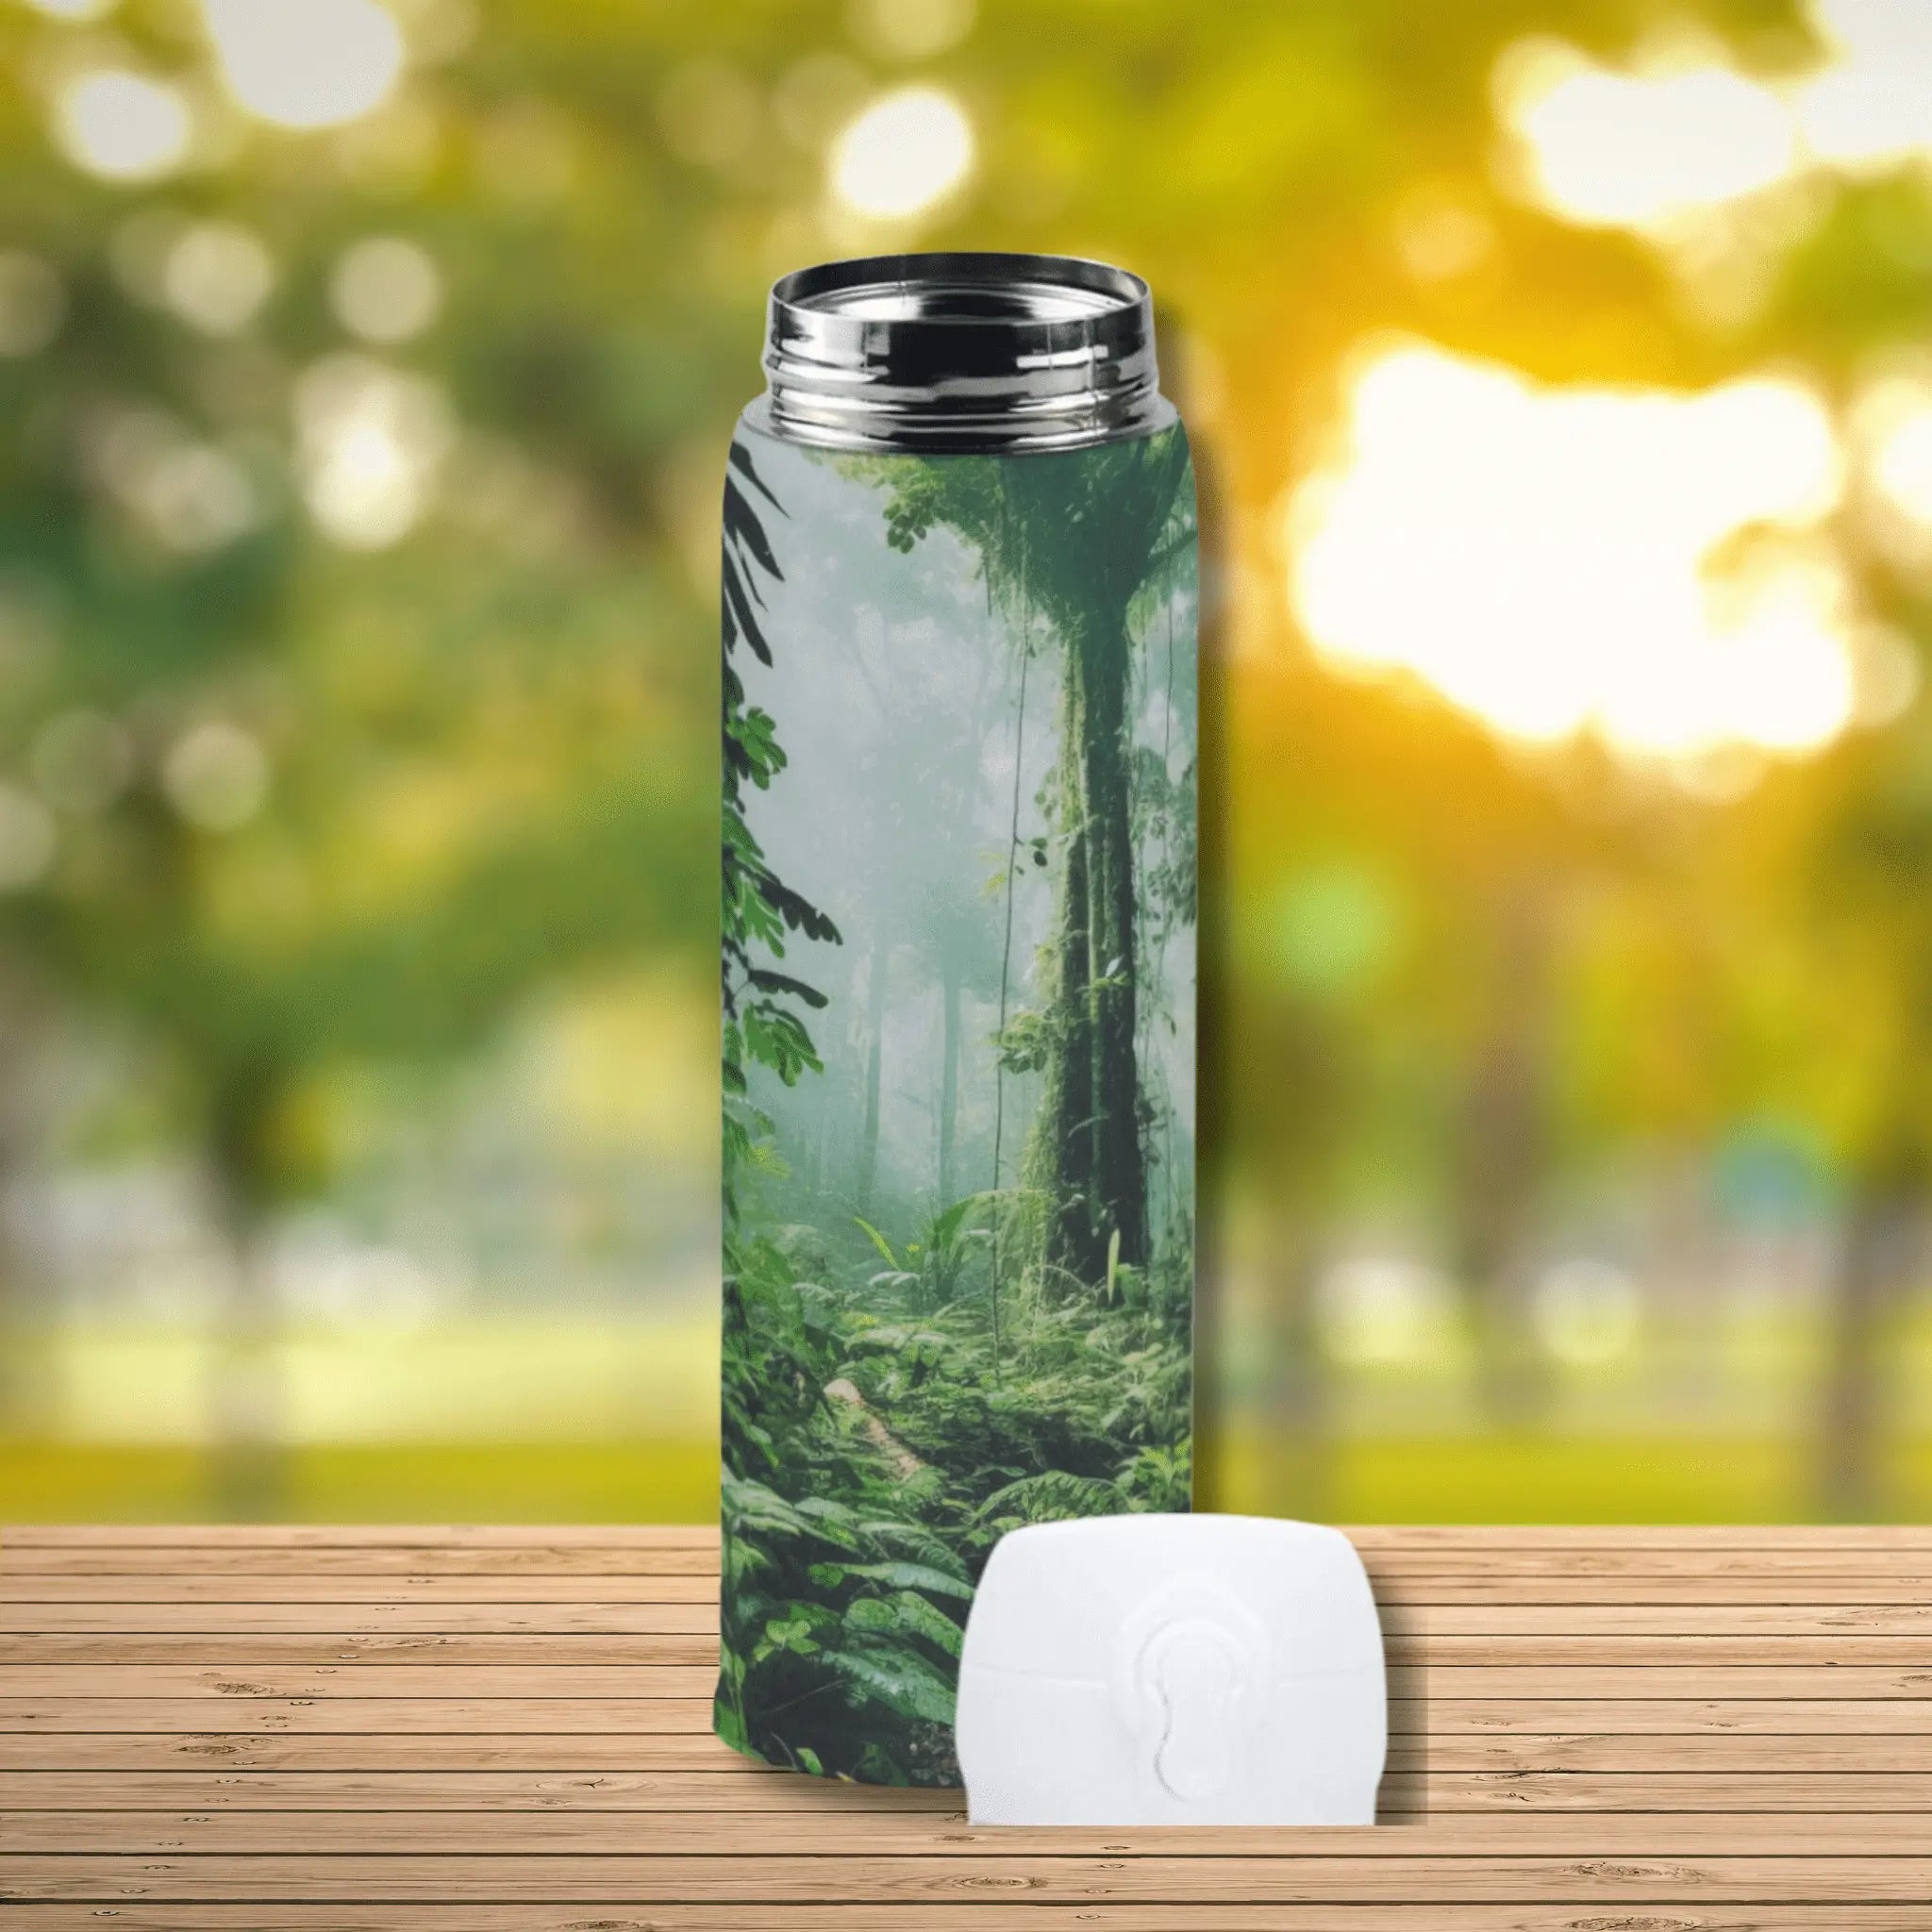 Vacuum Insulated Stainless Steel Tumbler